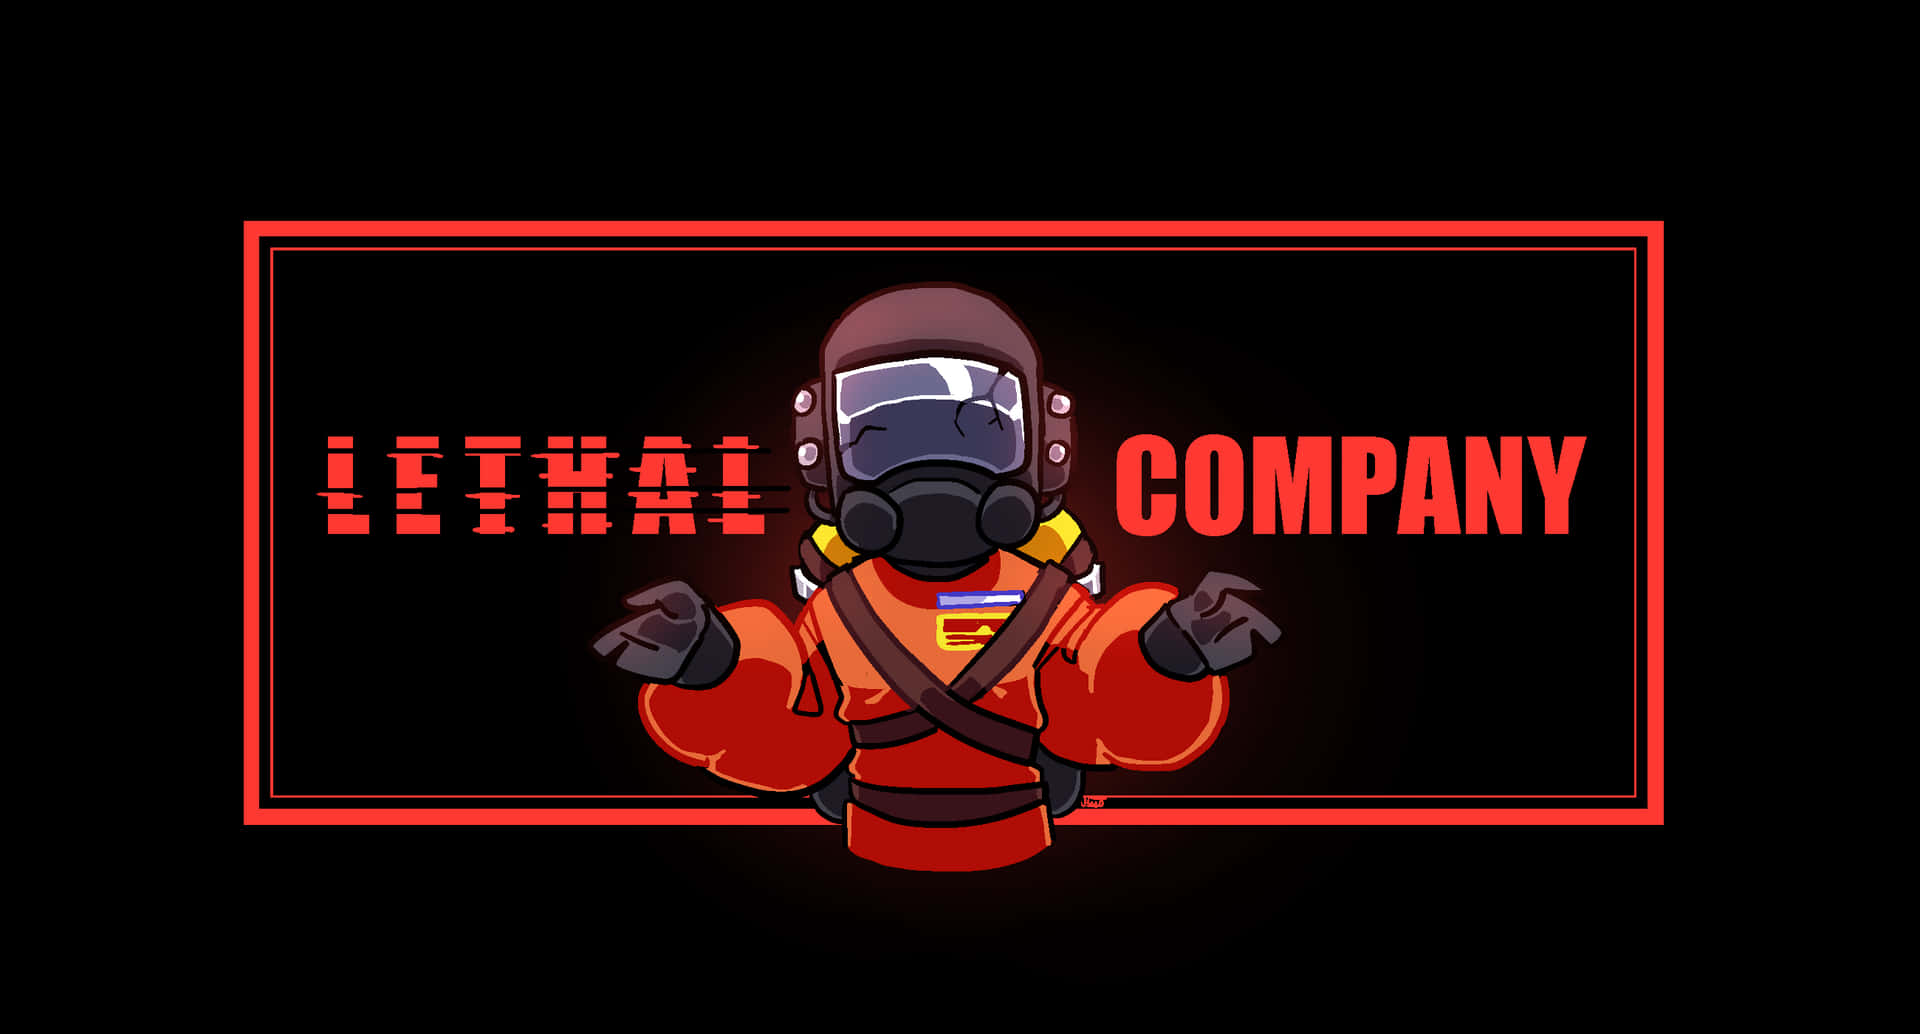 Lethal Company Logowith Character Wallpaper